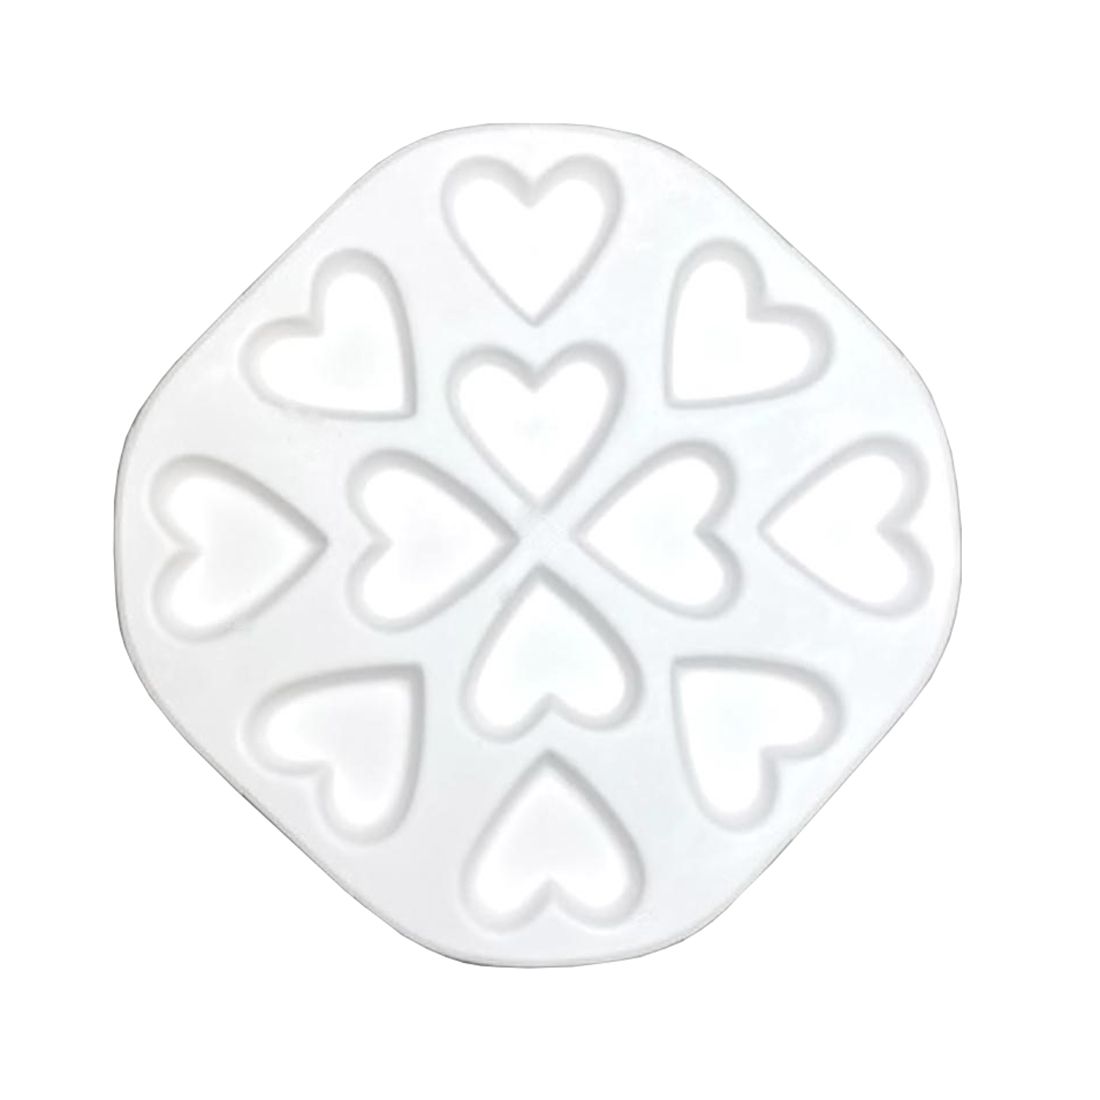 12 HEART CASTING MOLD by CPI